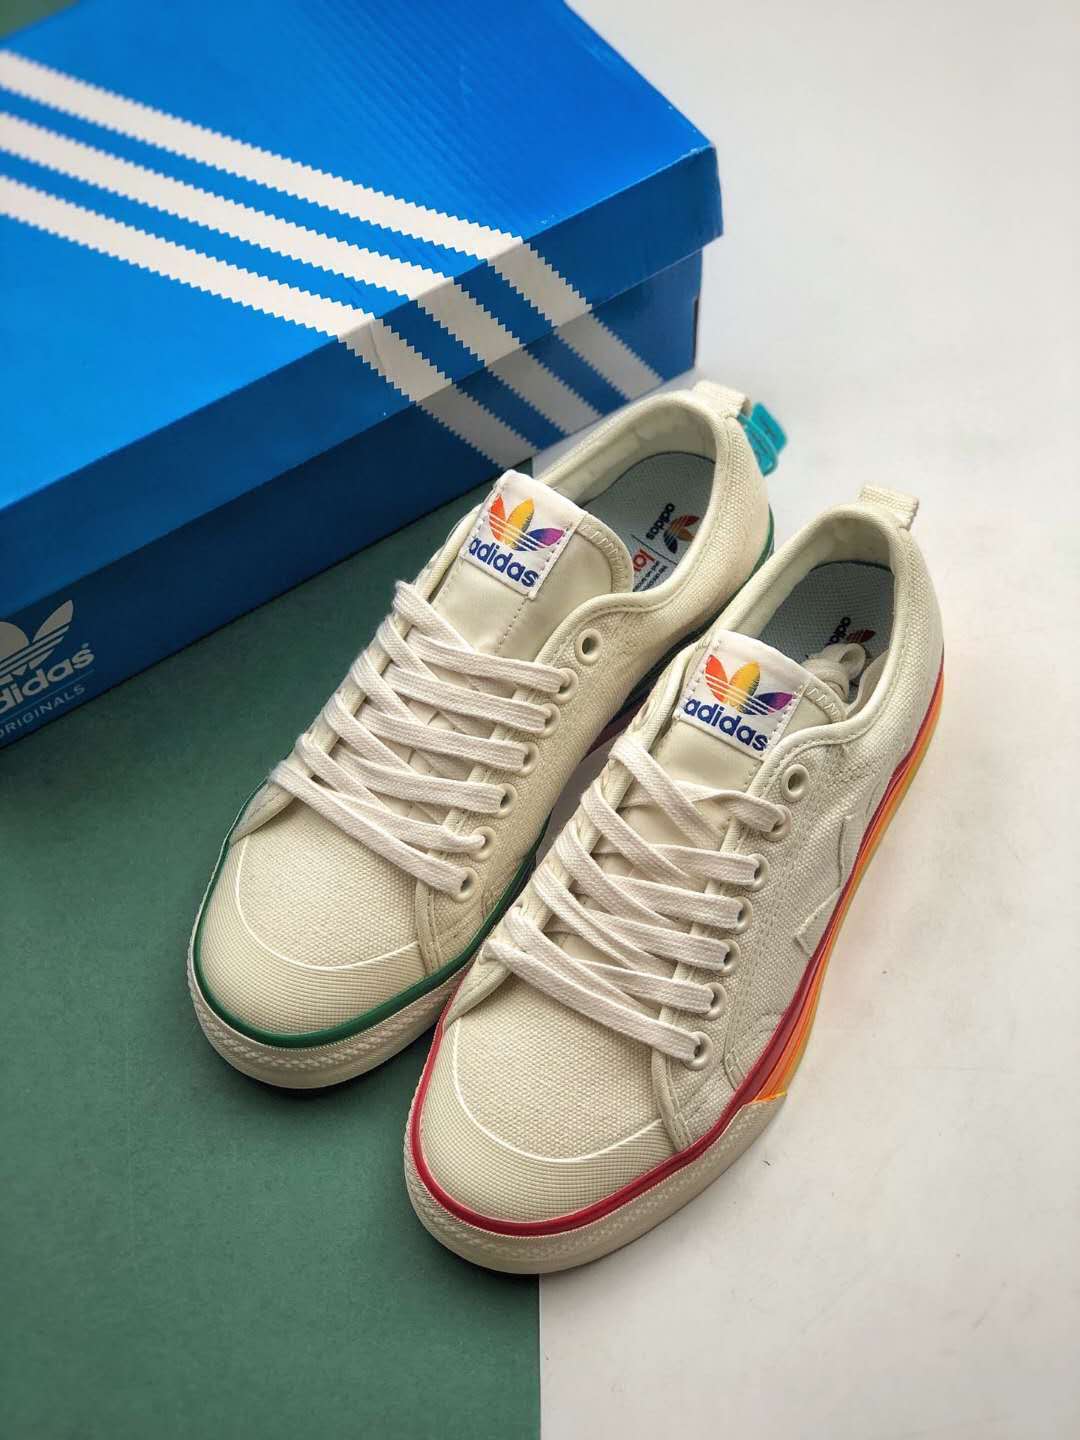 Adidas Nizza 'Pride' EF2319 - Colorful Sneakers for Stylish Pride Celebrations